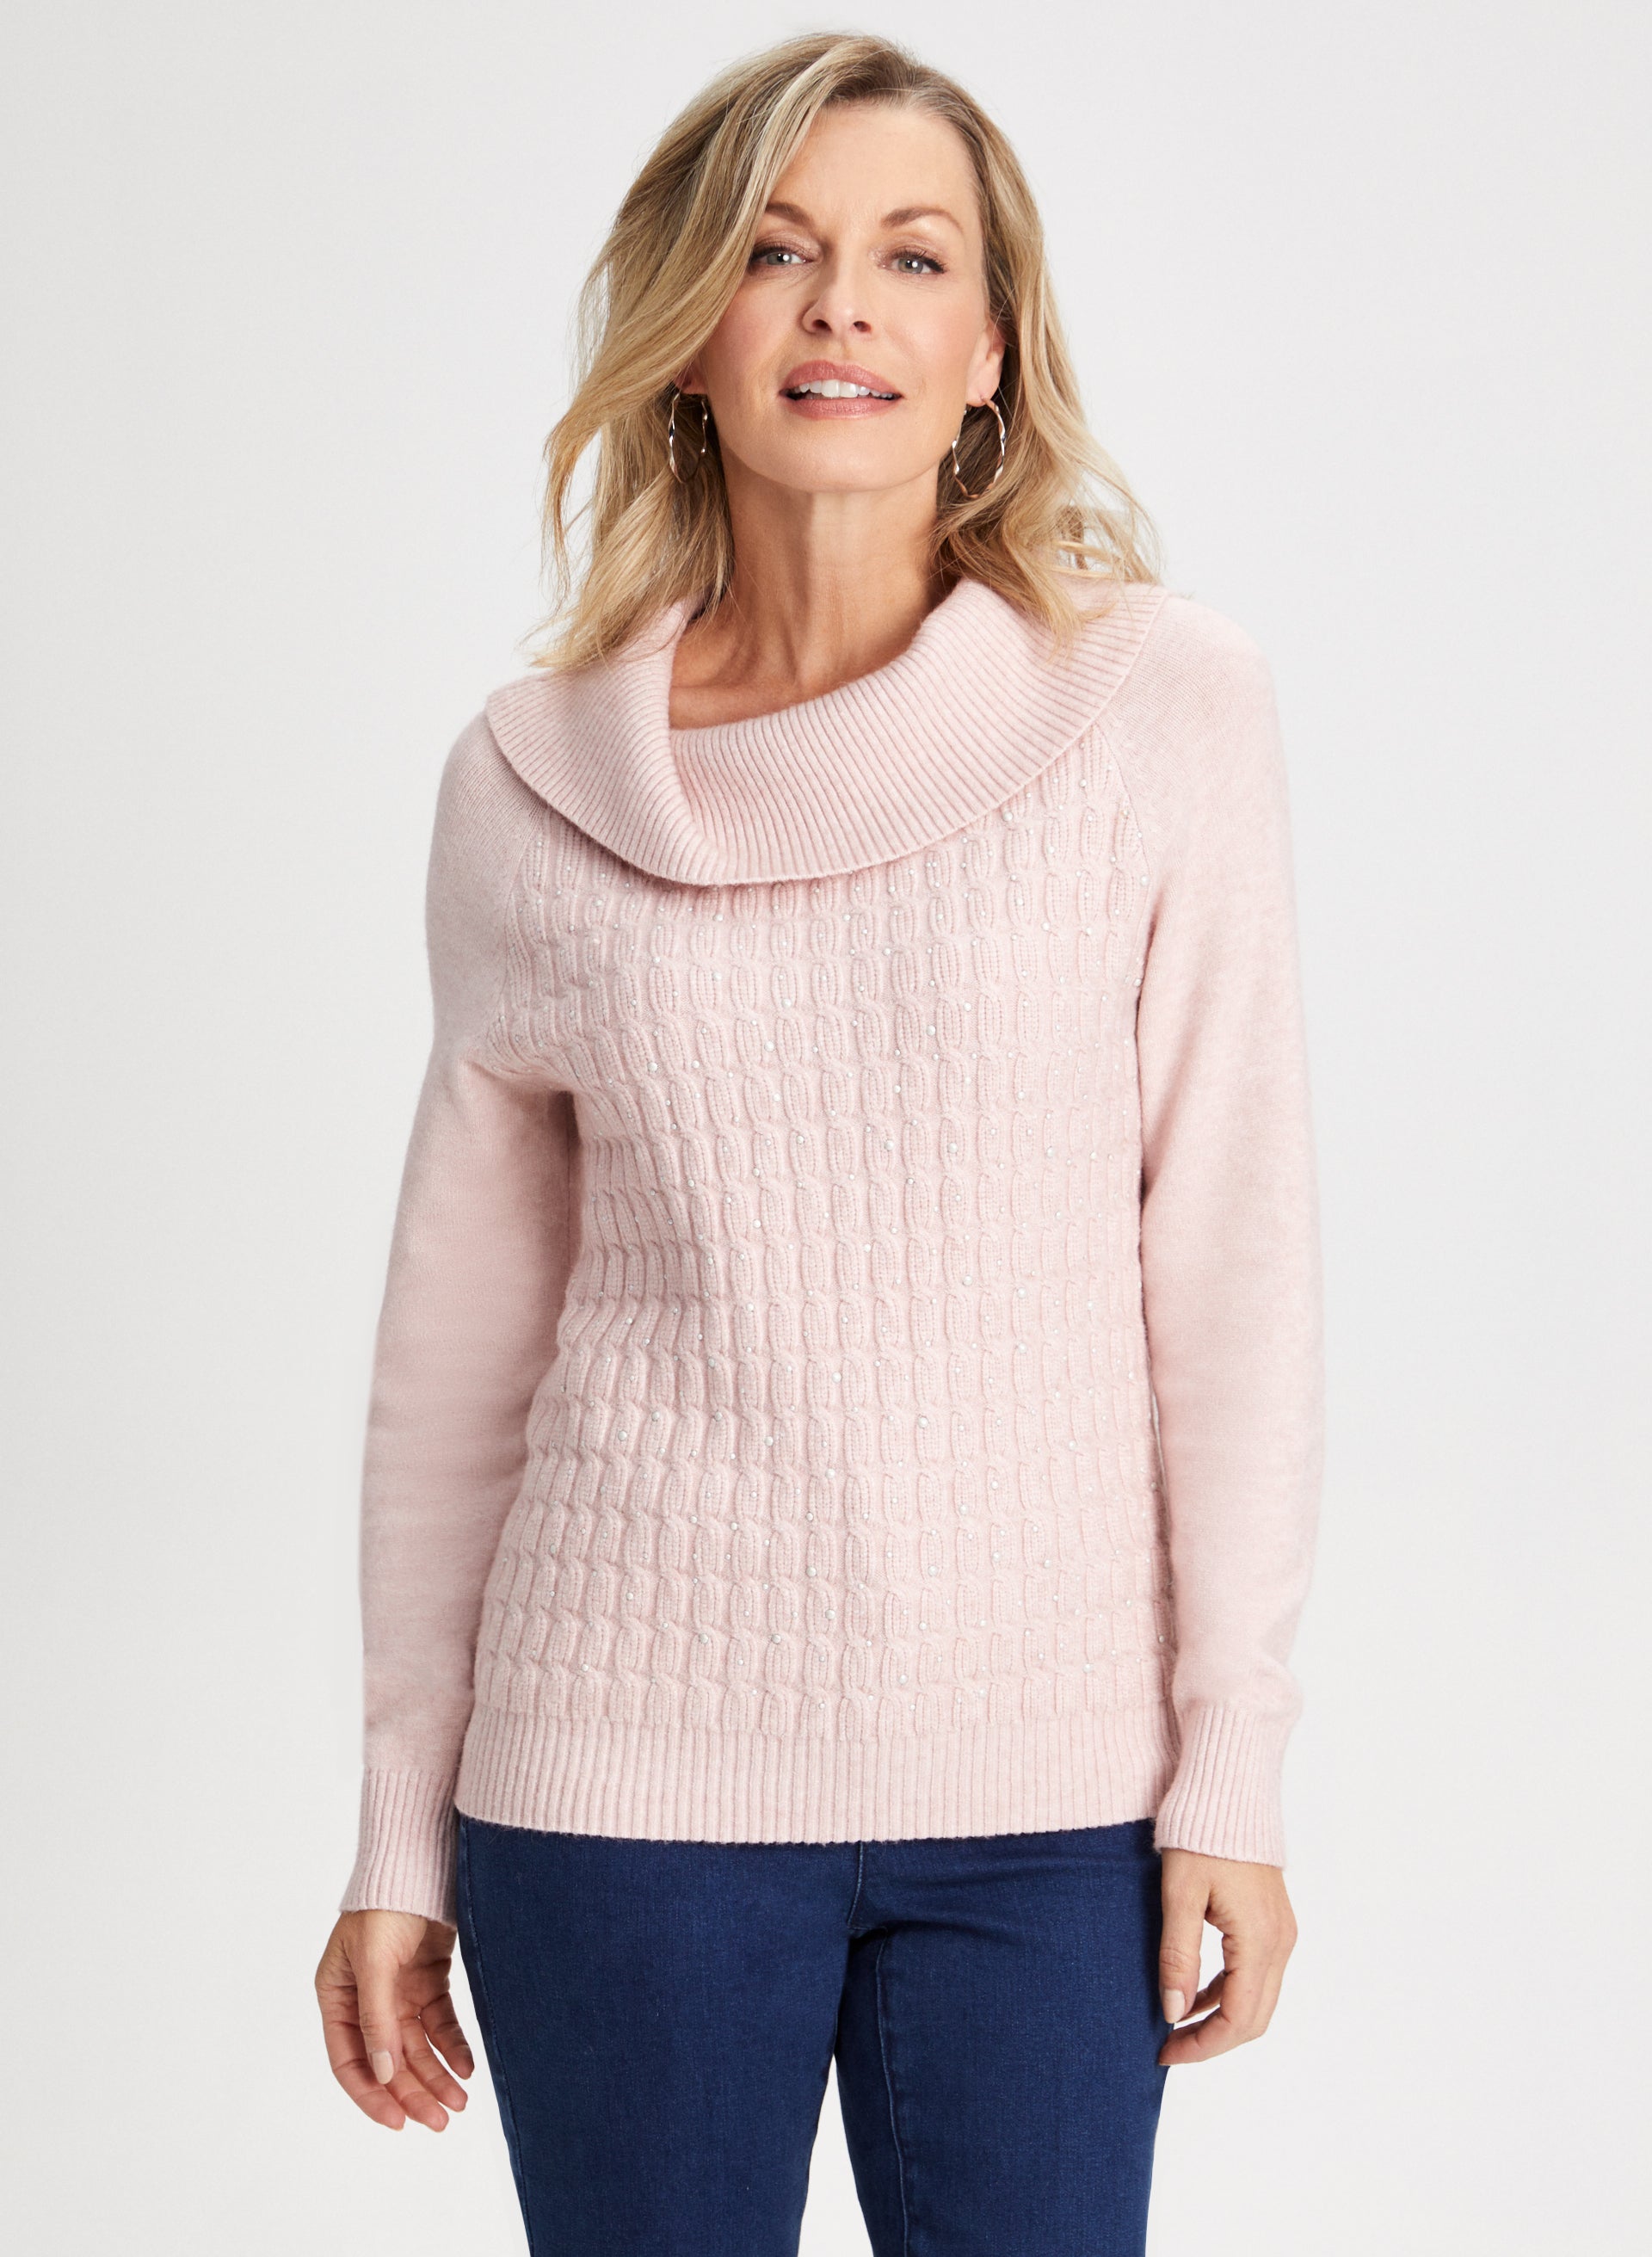 Pearl Embellished Cowl Neck Sweater